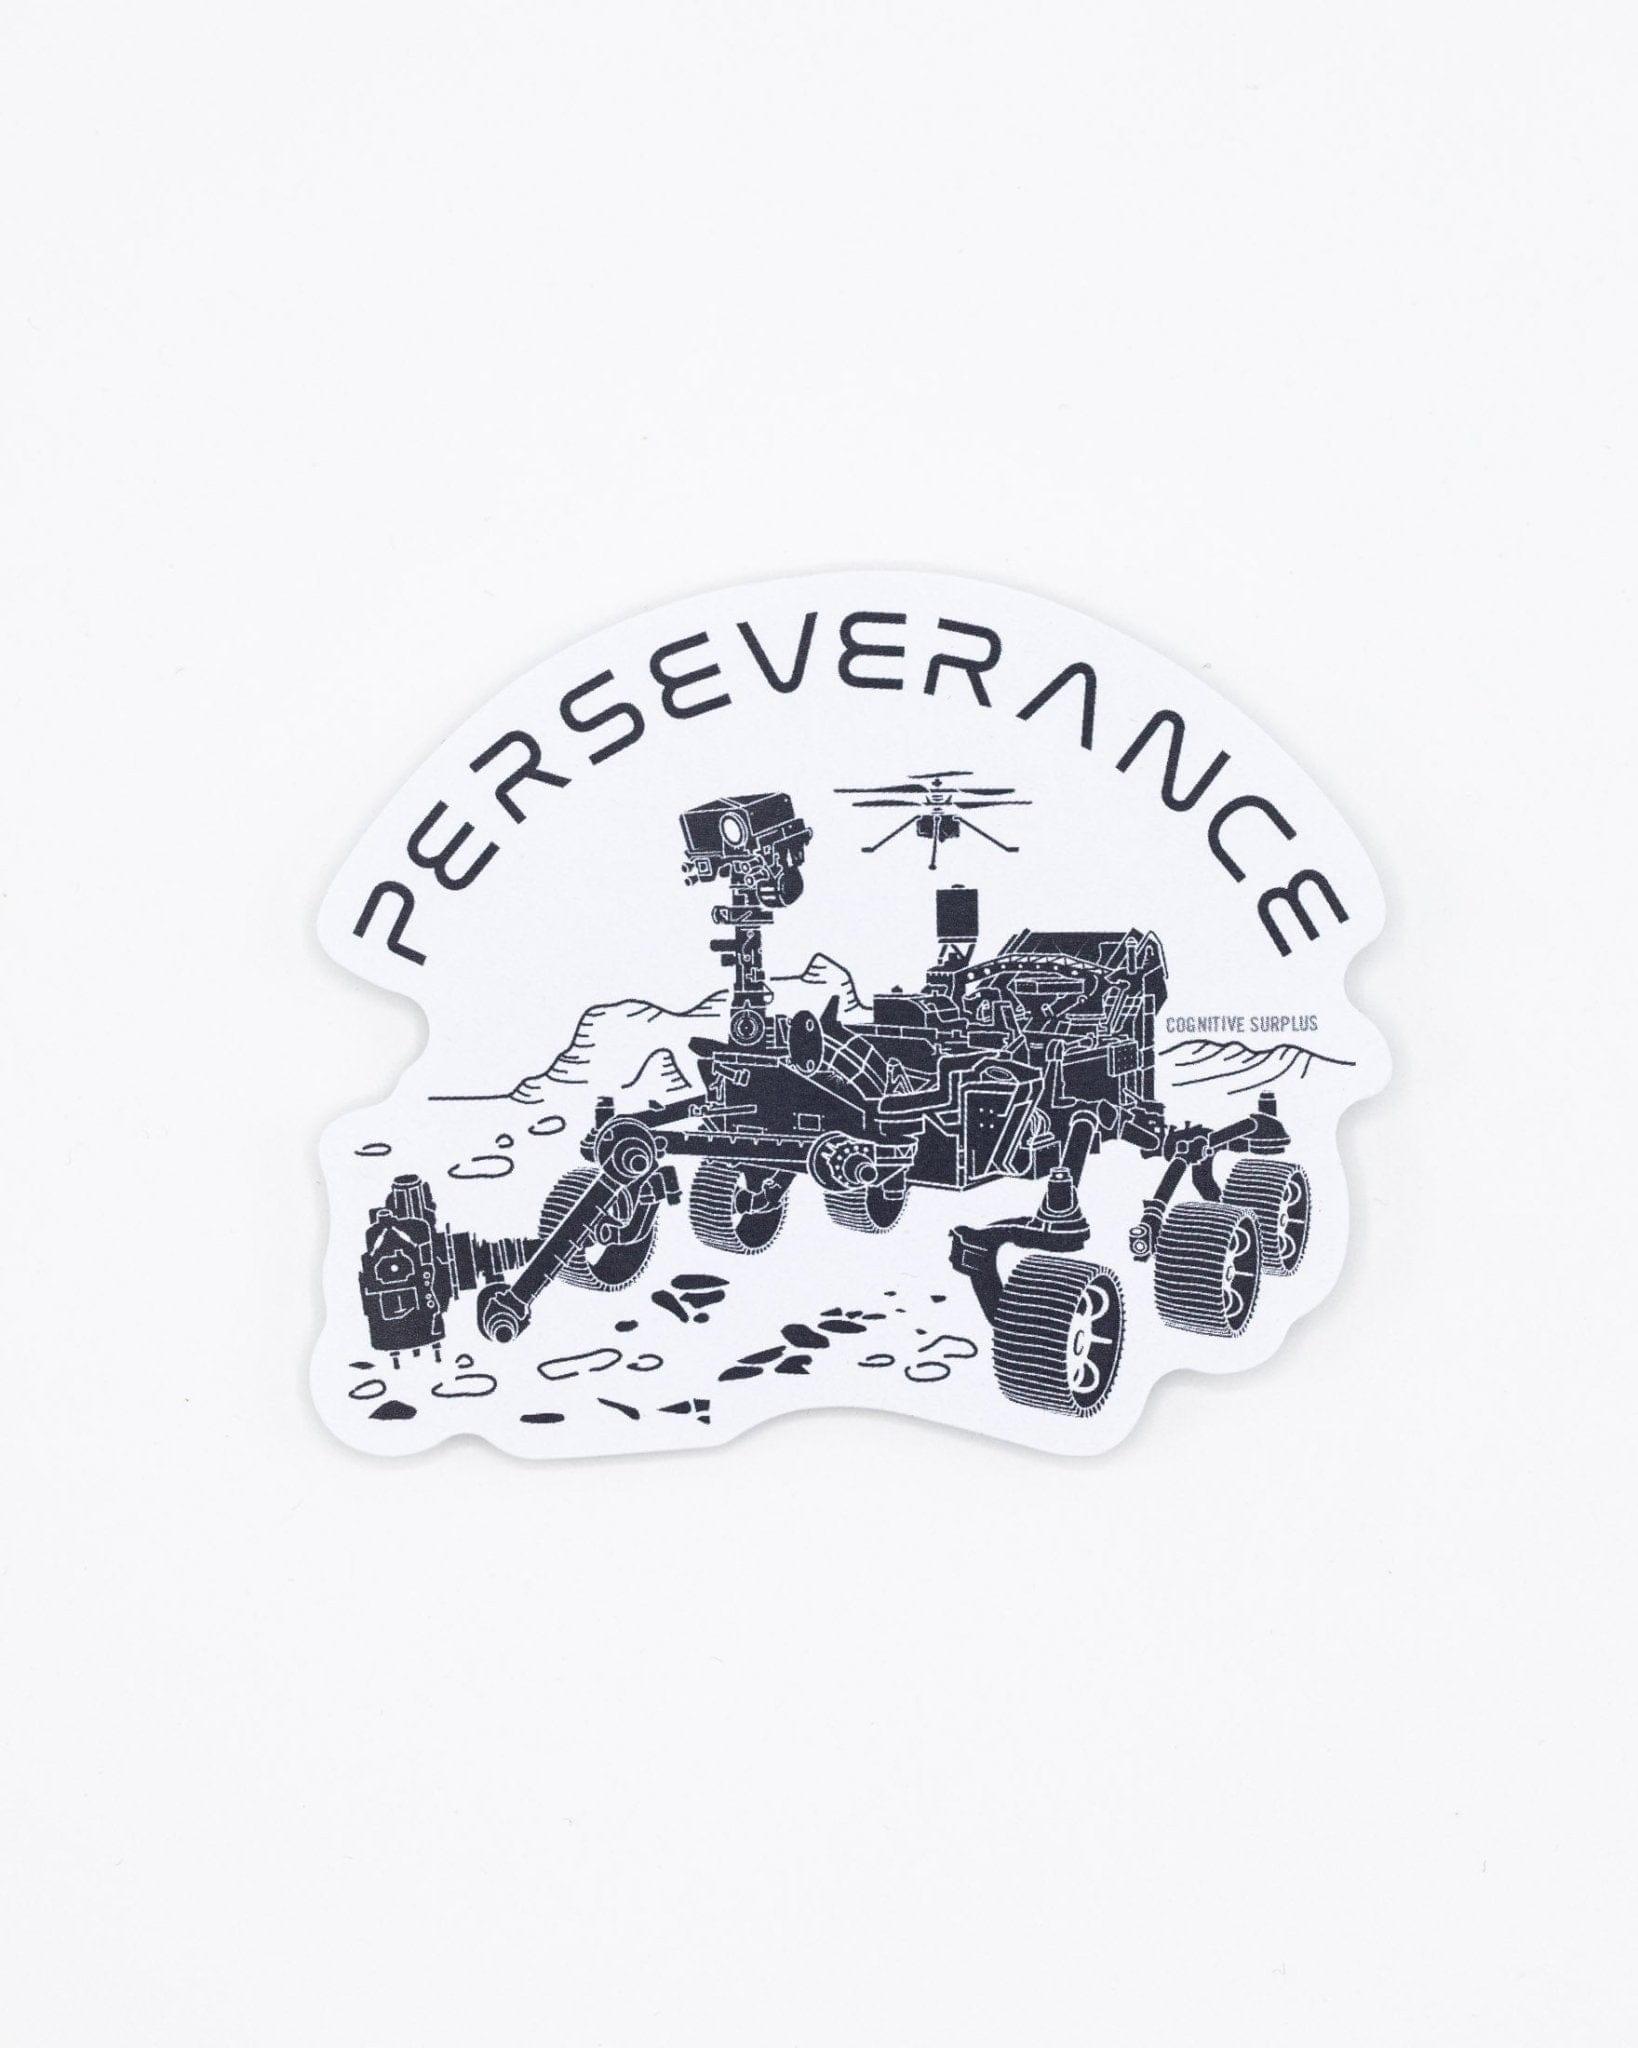 Perseverence Mars Rover Sticker Cognitive Surplus